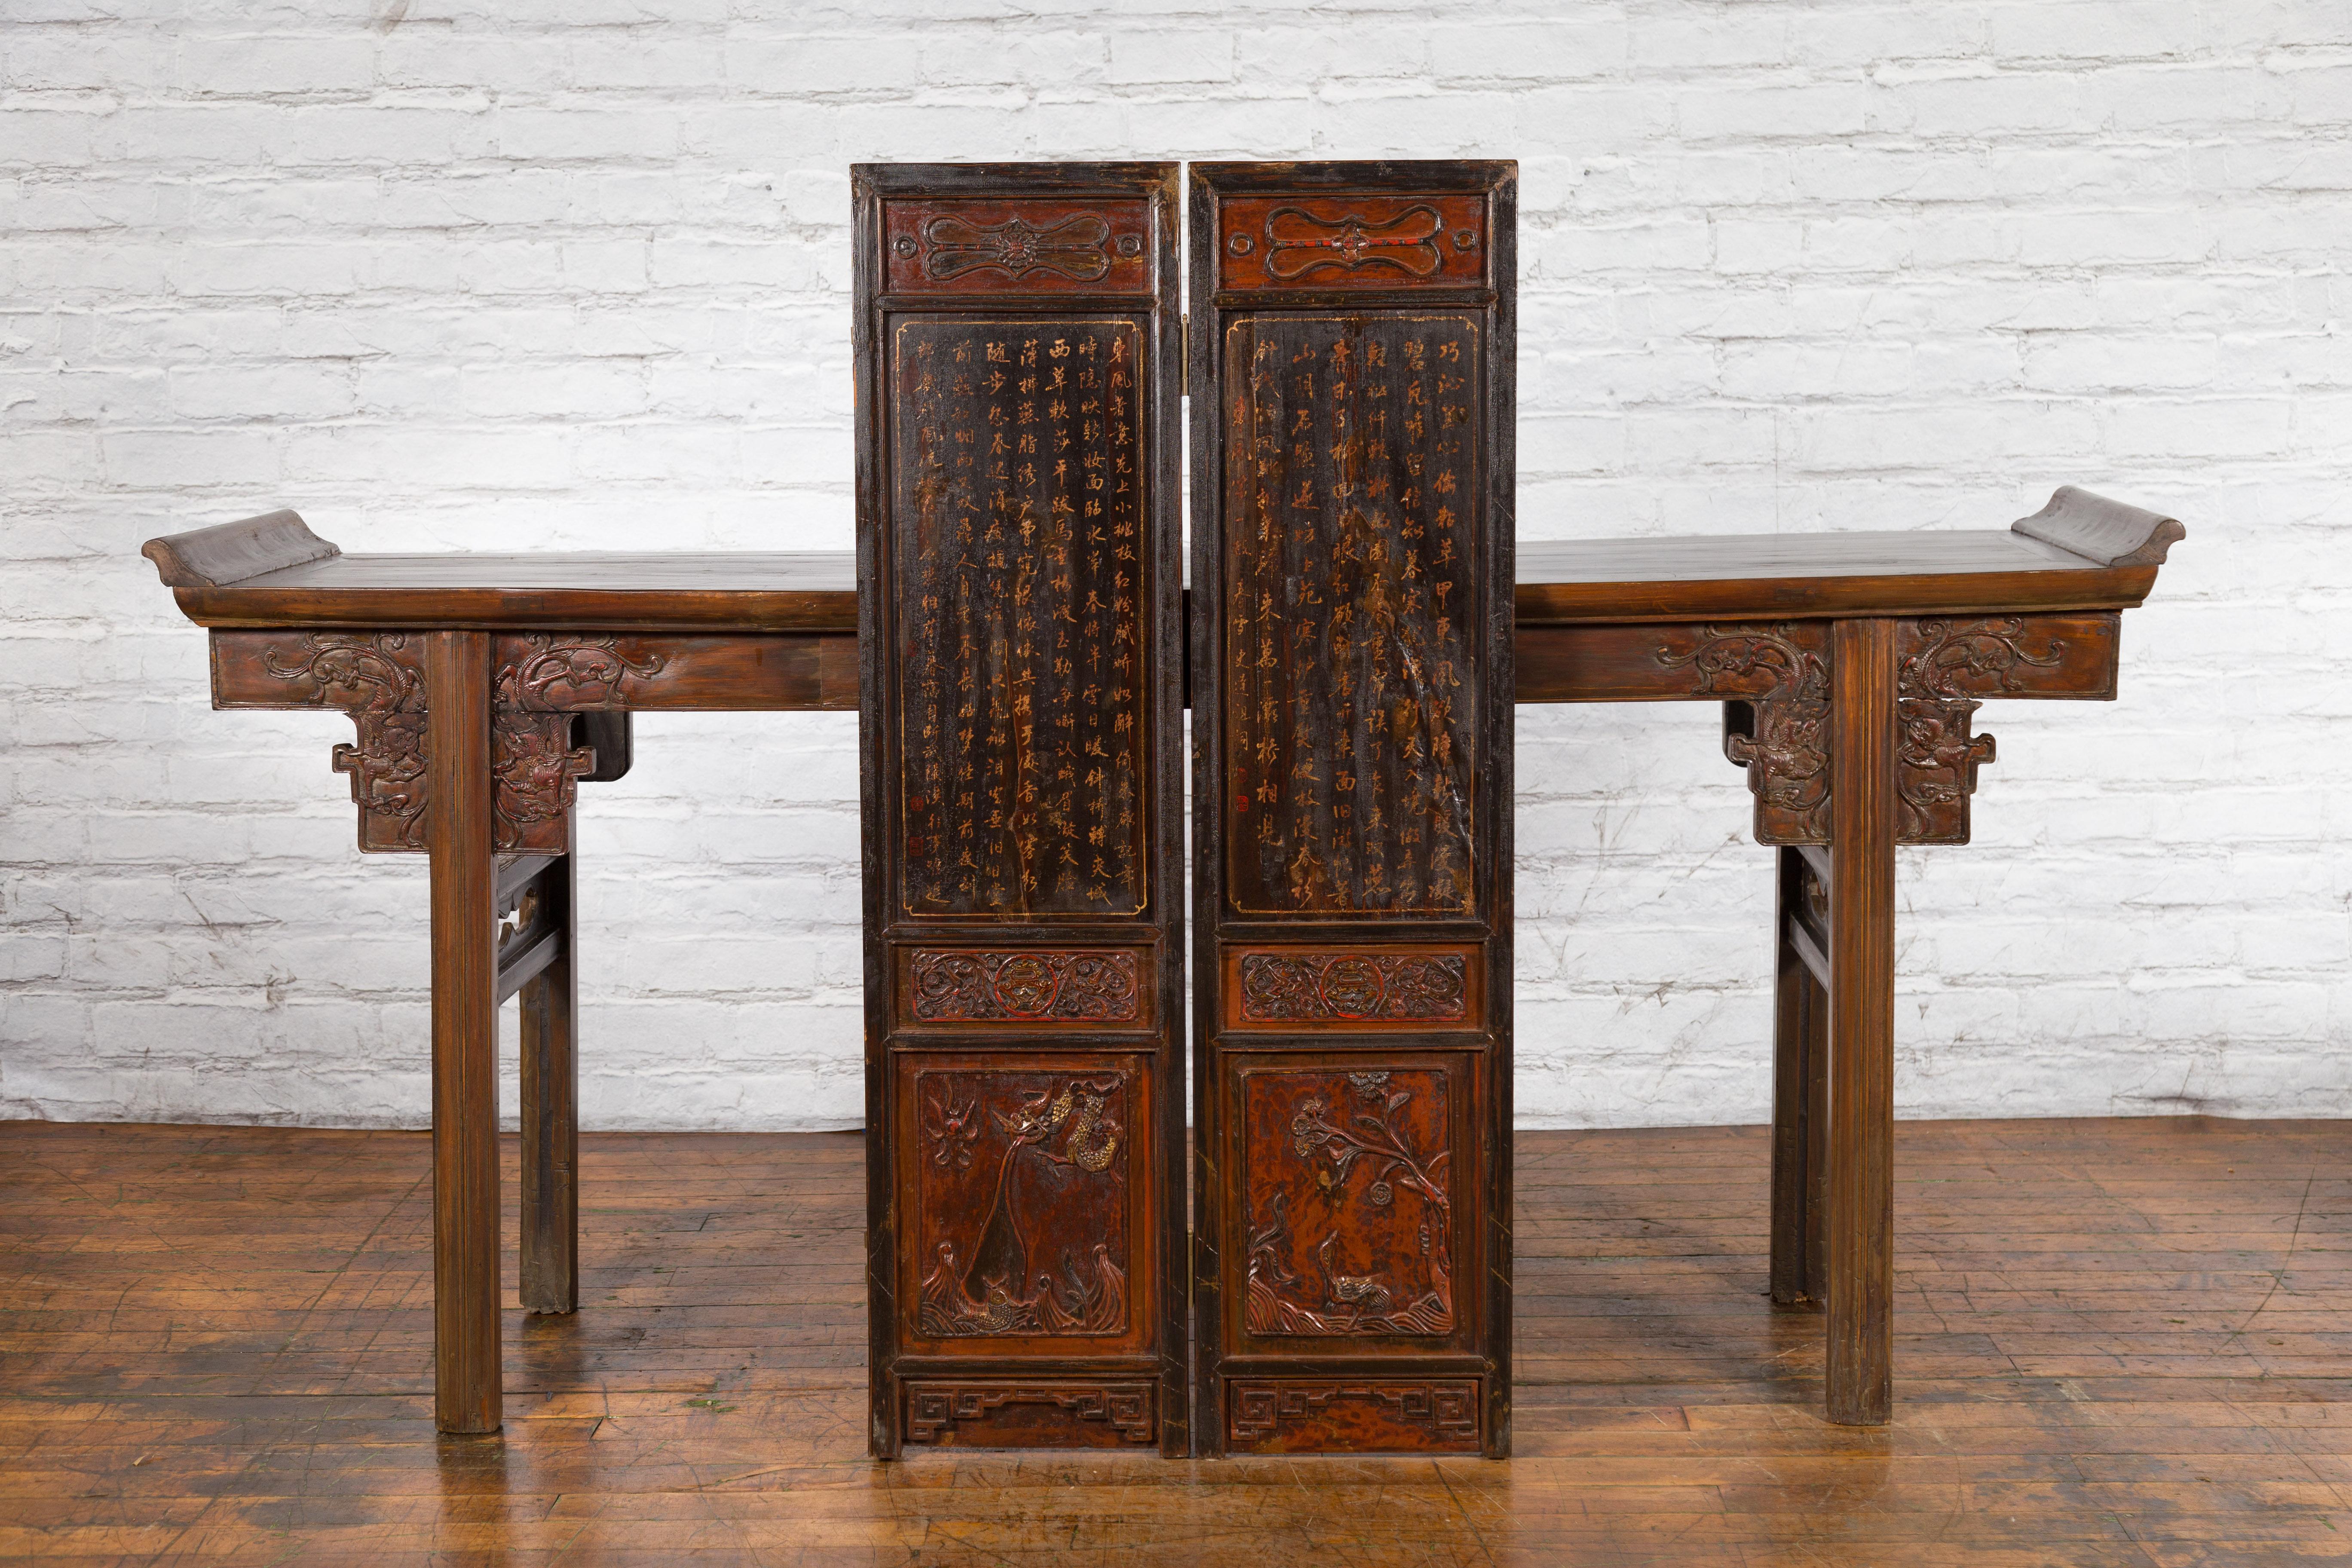 A Chinese two-panel screen from the early 20th century, with carvings, gilt motifs and calligraphy. Created in China during the early years of the 20th century, this screen features a brown lacquered ground accented with dark red highlights and